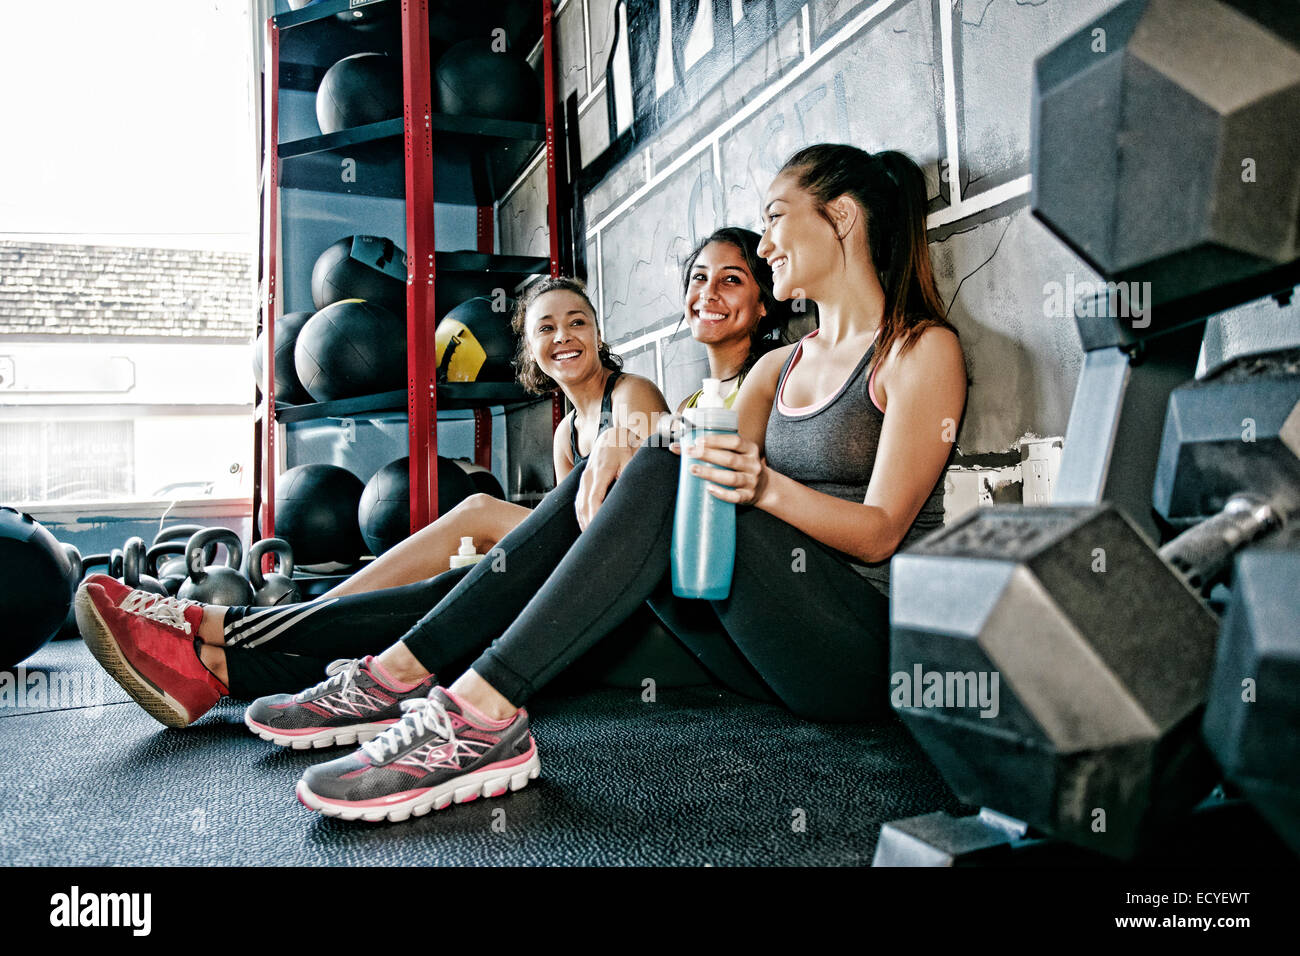 Women resting together in gym Stock Photo